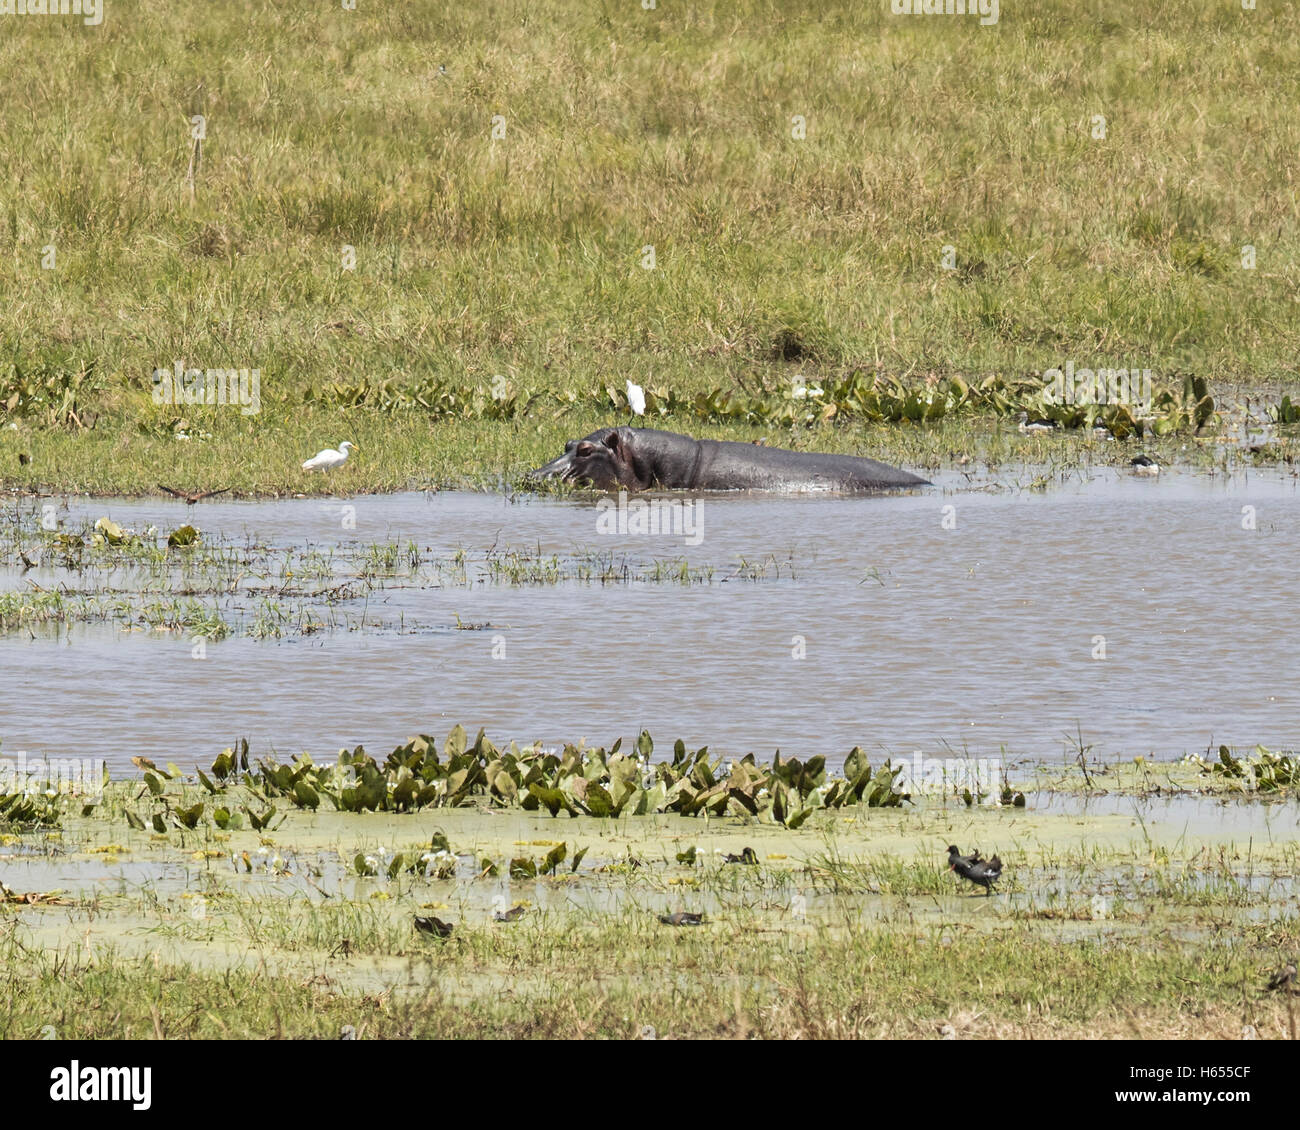 A hippo and cattle egrets in Tarangire National Park, Tanzania Stock Photo